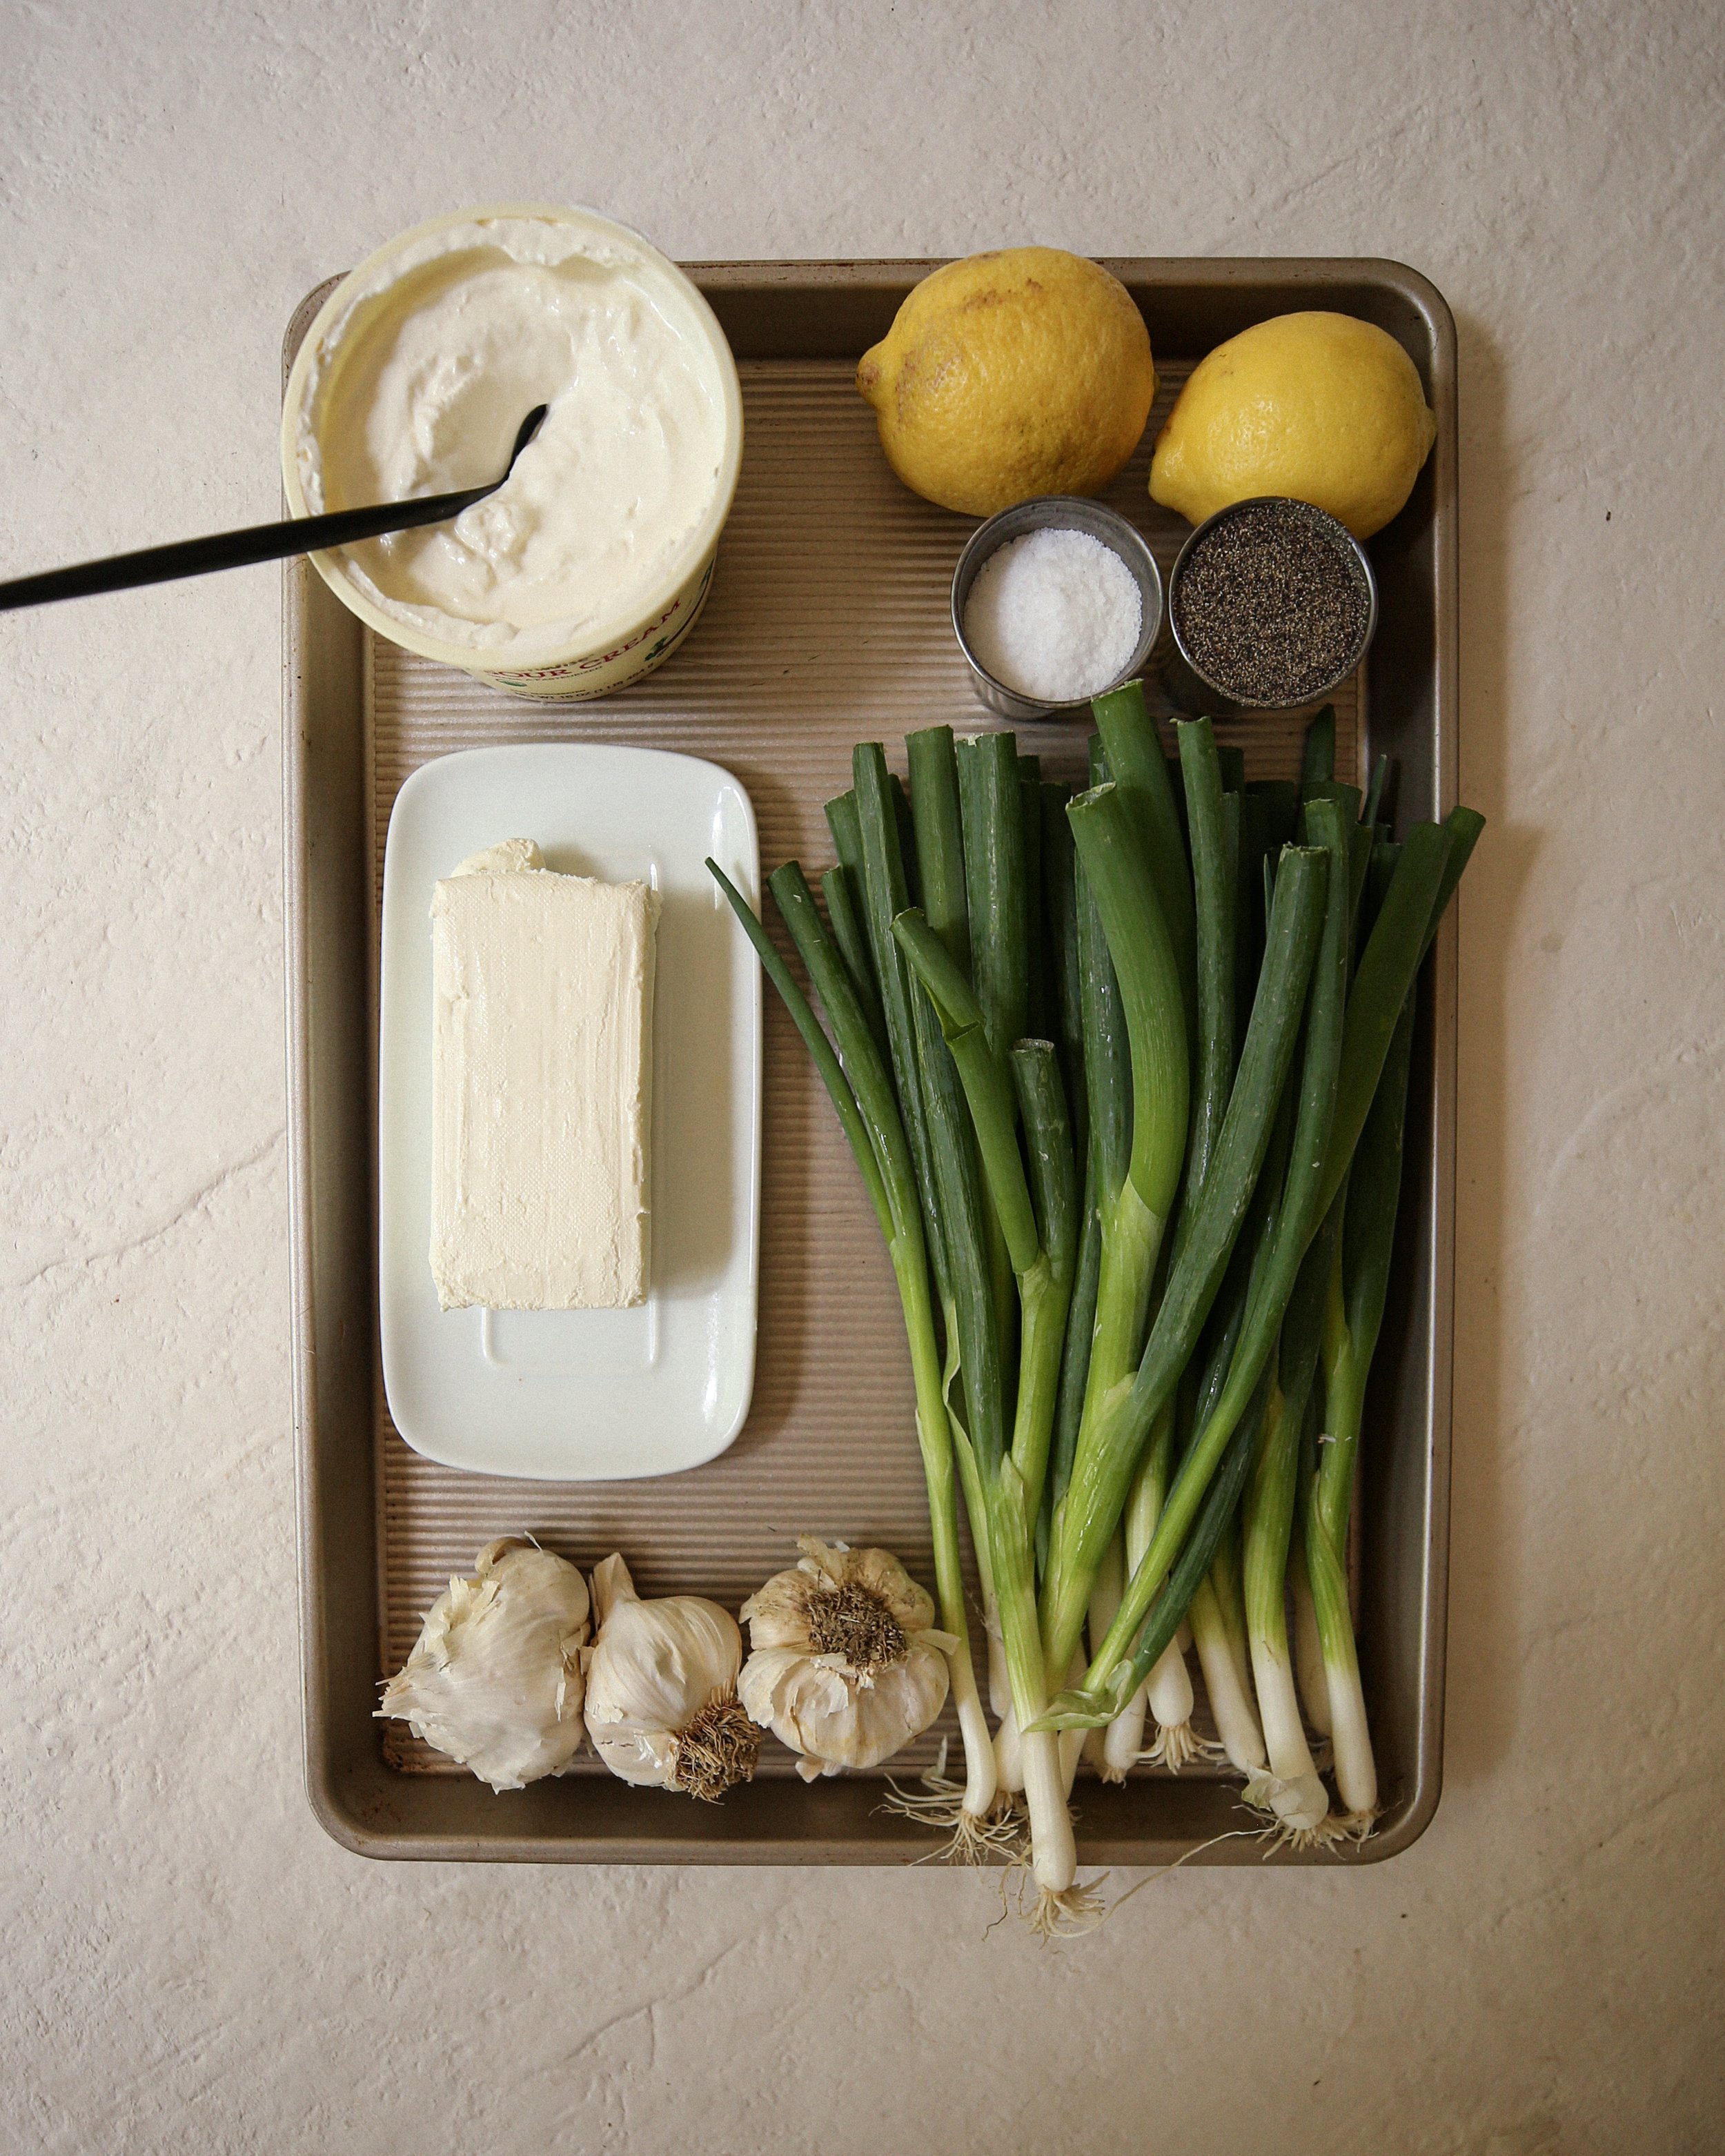 Garlic Lovers' Spring Onion Dip — Probably This